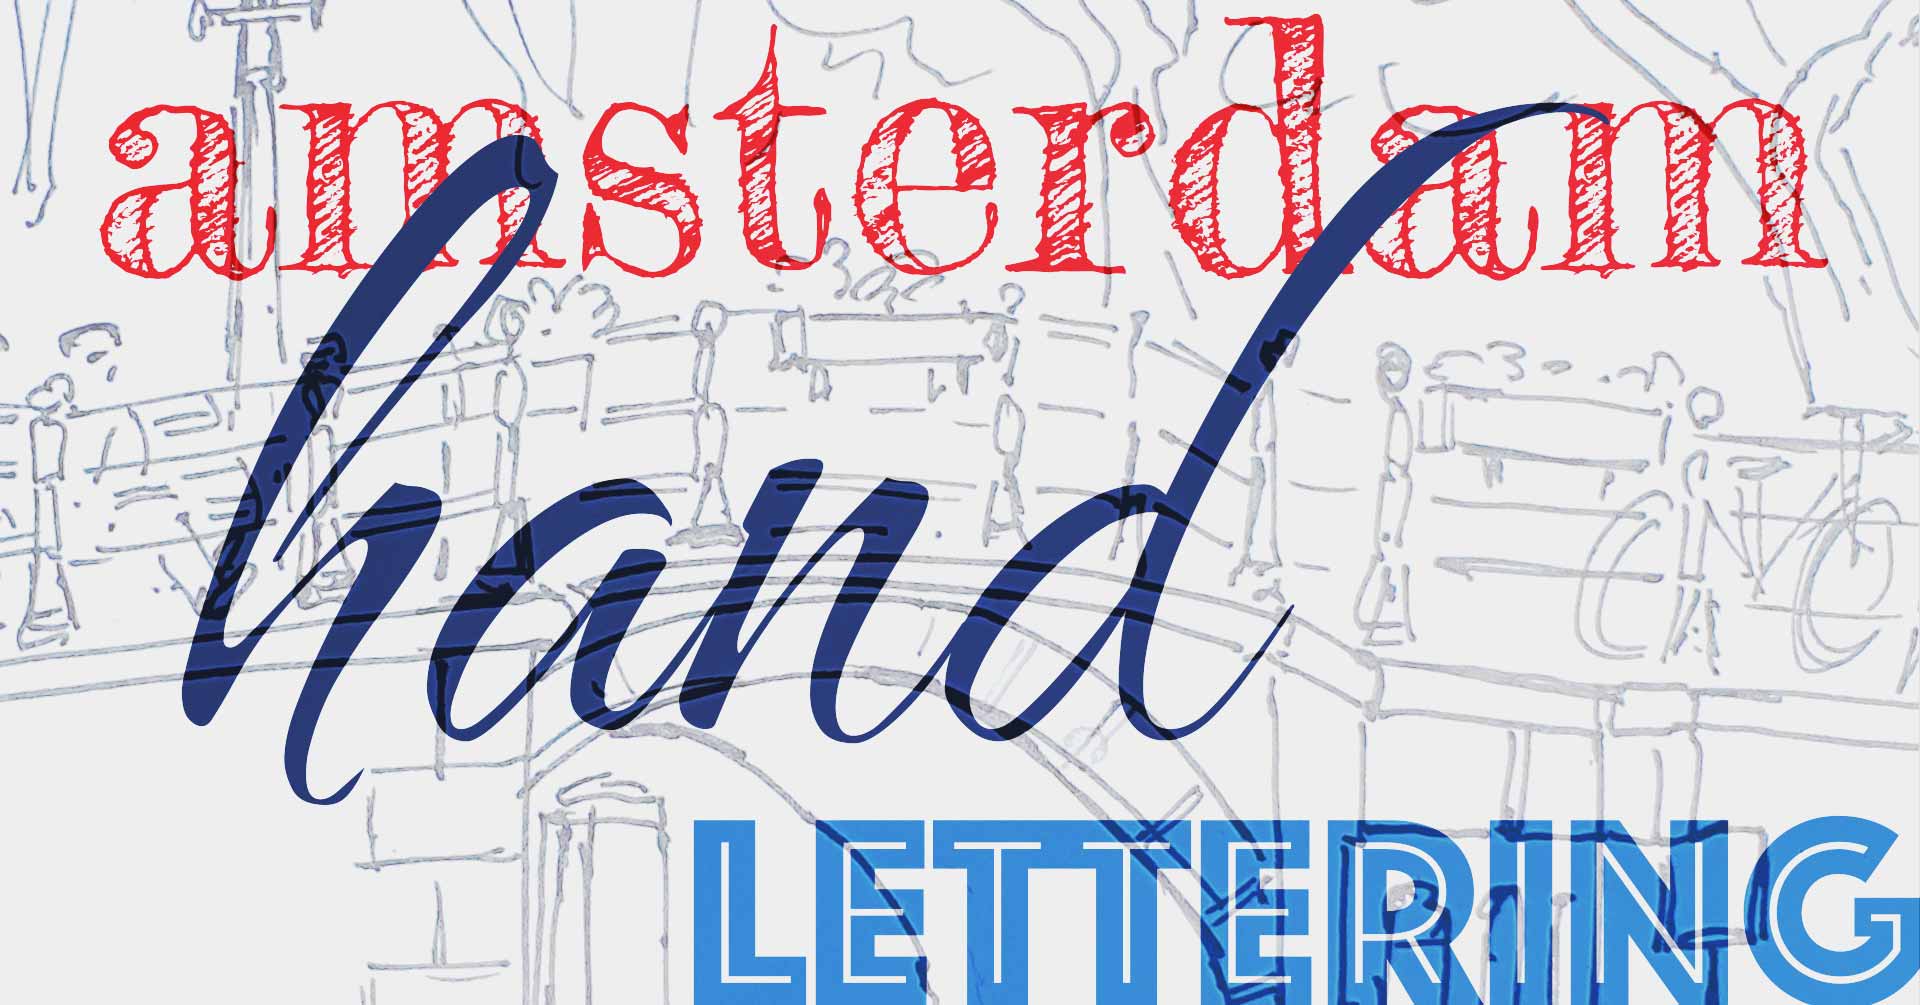 Create your own Amsterdam Greeting Card